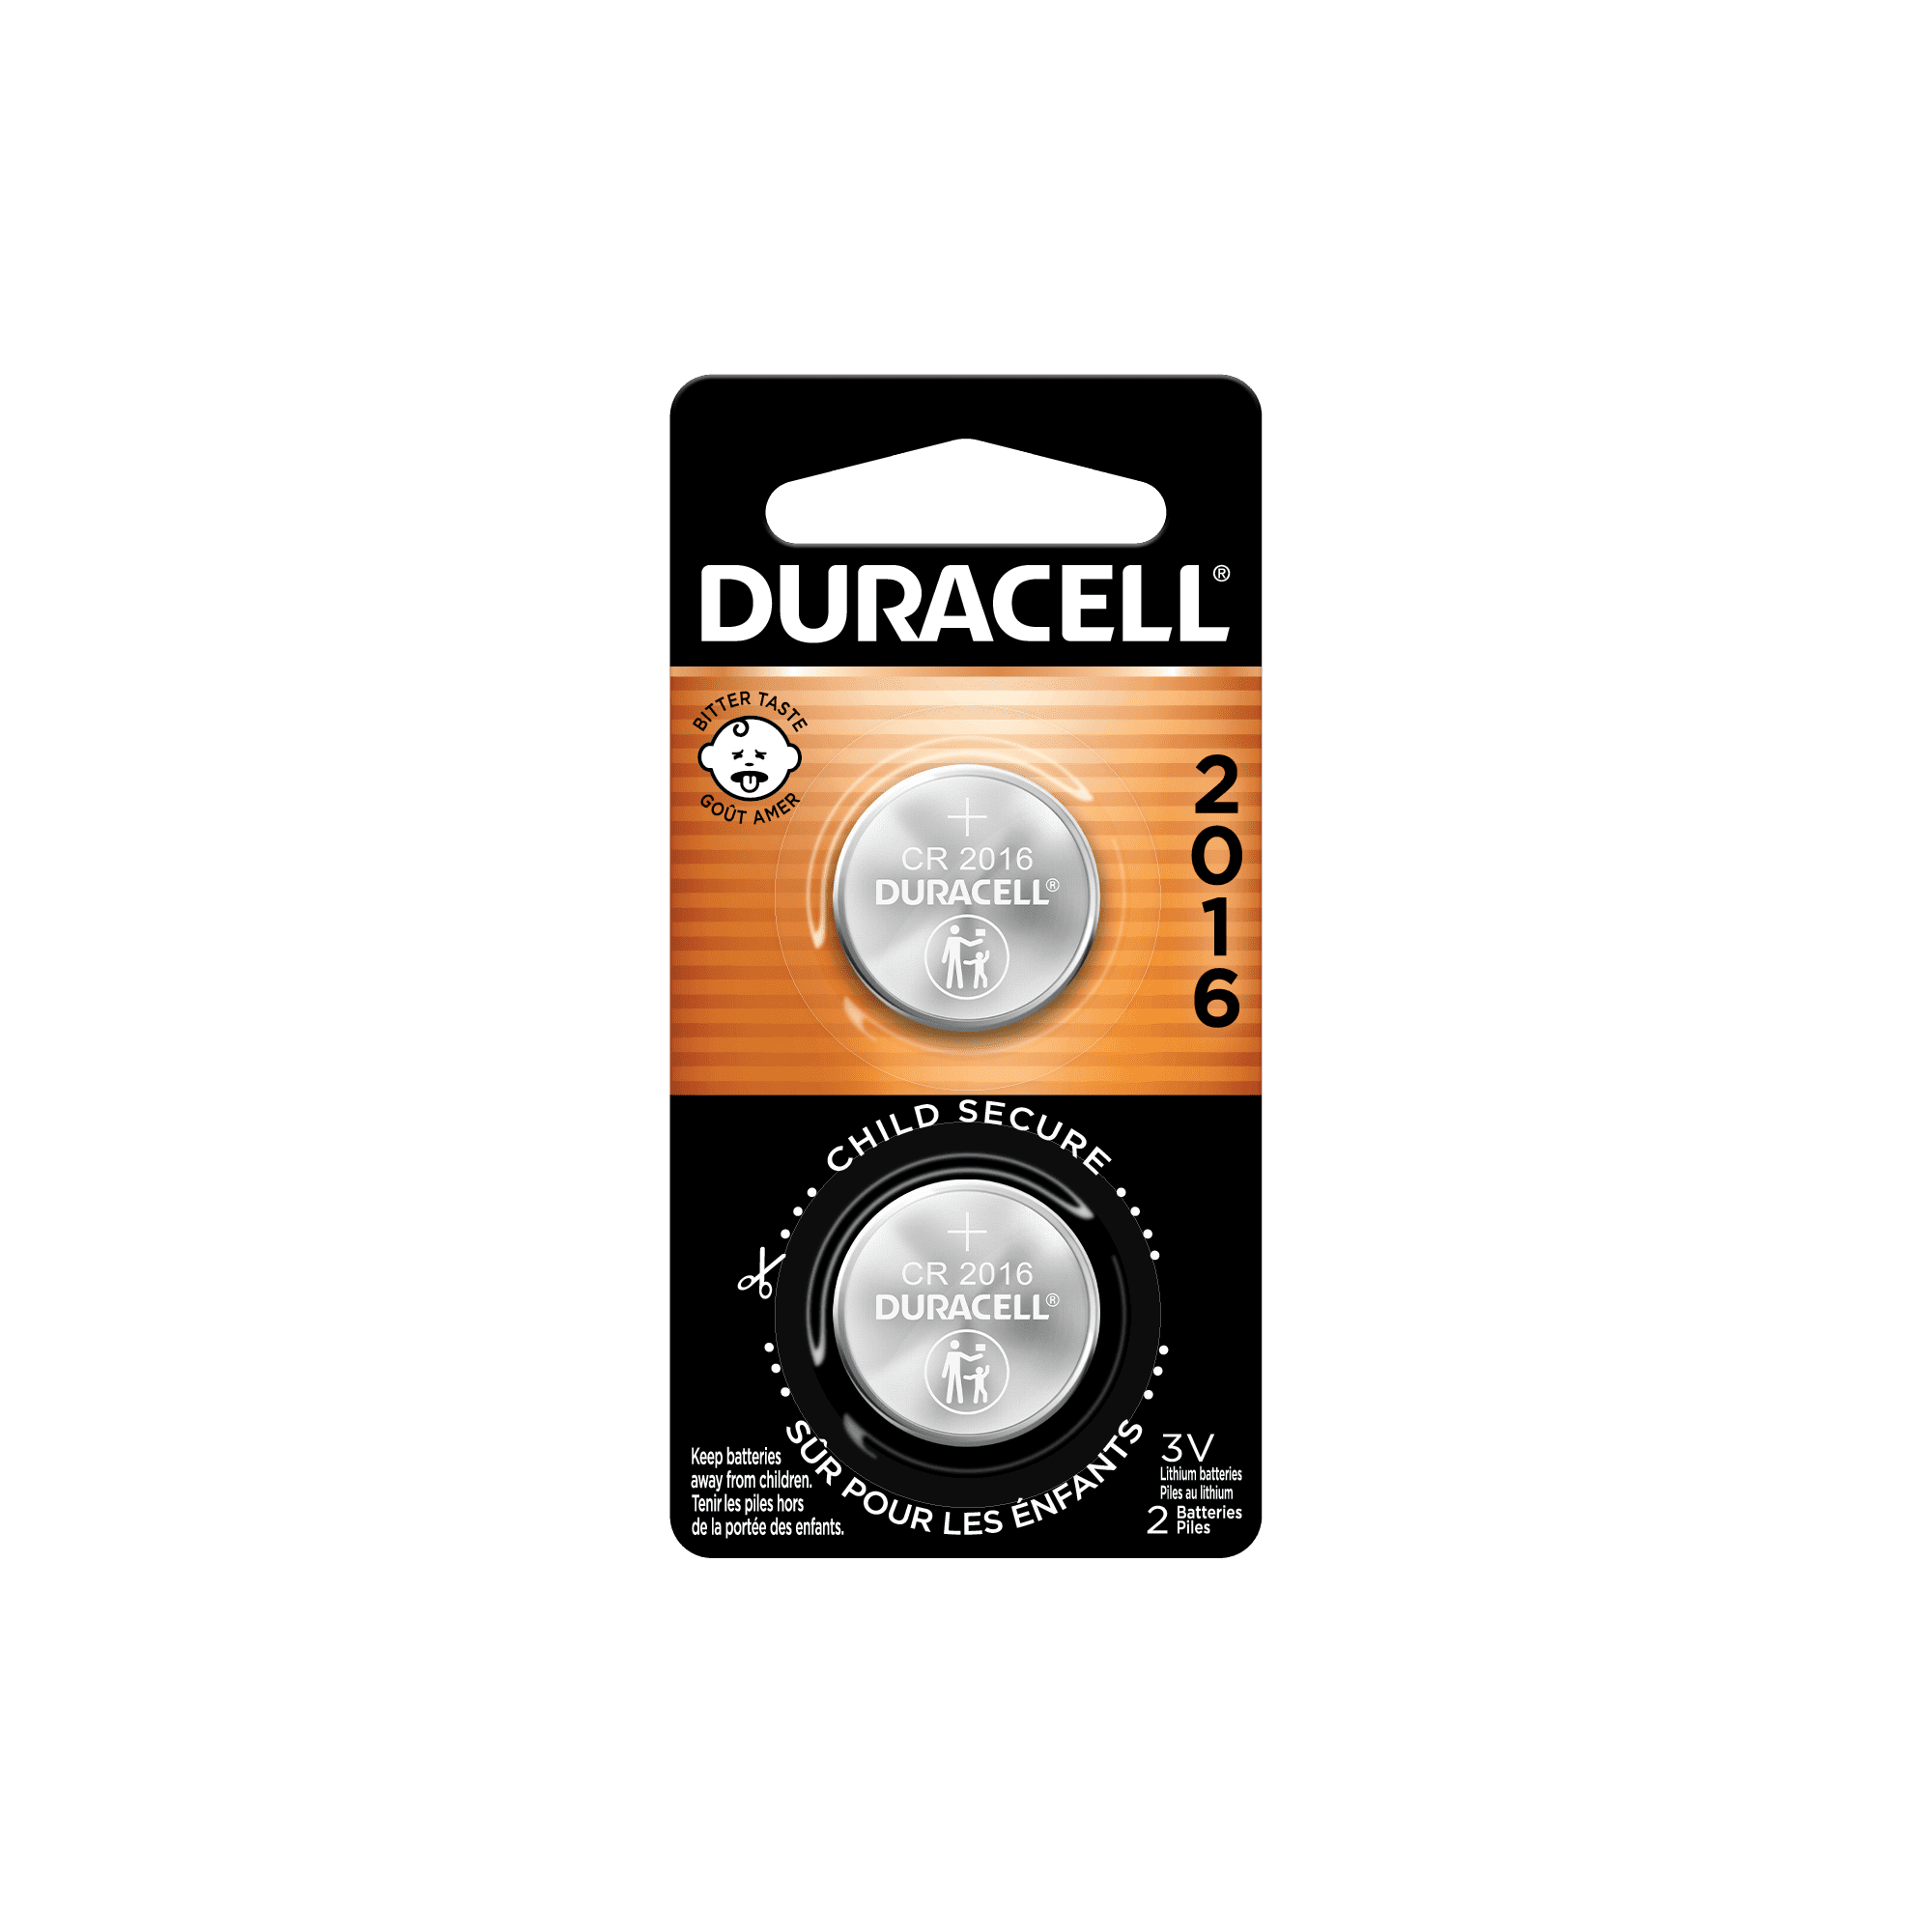 Duracell 2016 Lithium Coin Battery 3V, Bitter Coating Discourages Swallowing, 2 Pack